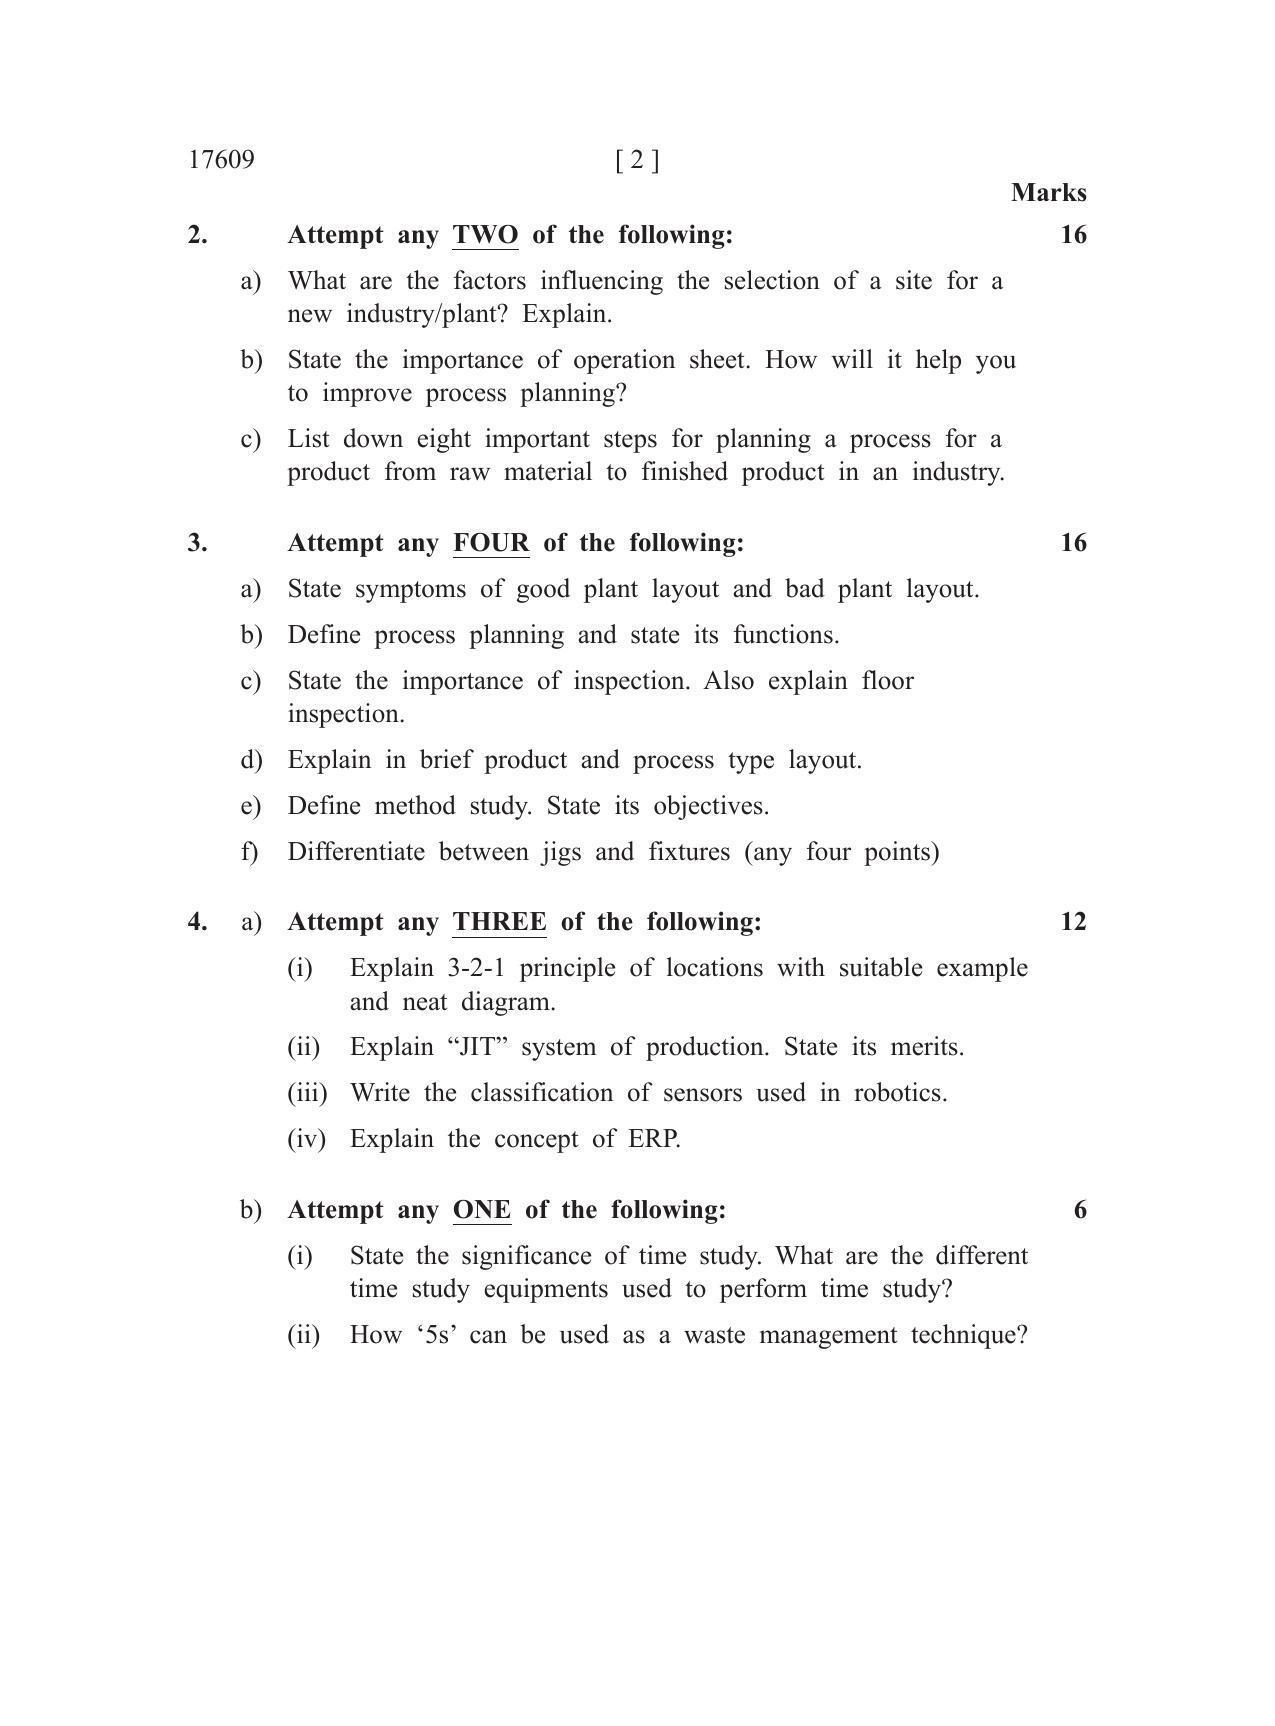 MSBTE Summer Question Paper 2019 - Production Engineering & Robotics - Page 2